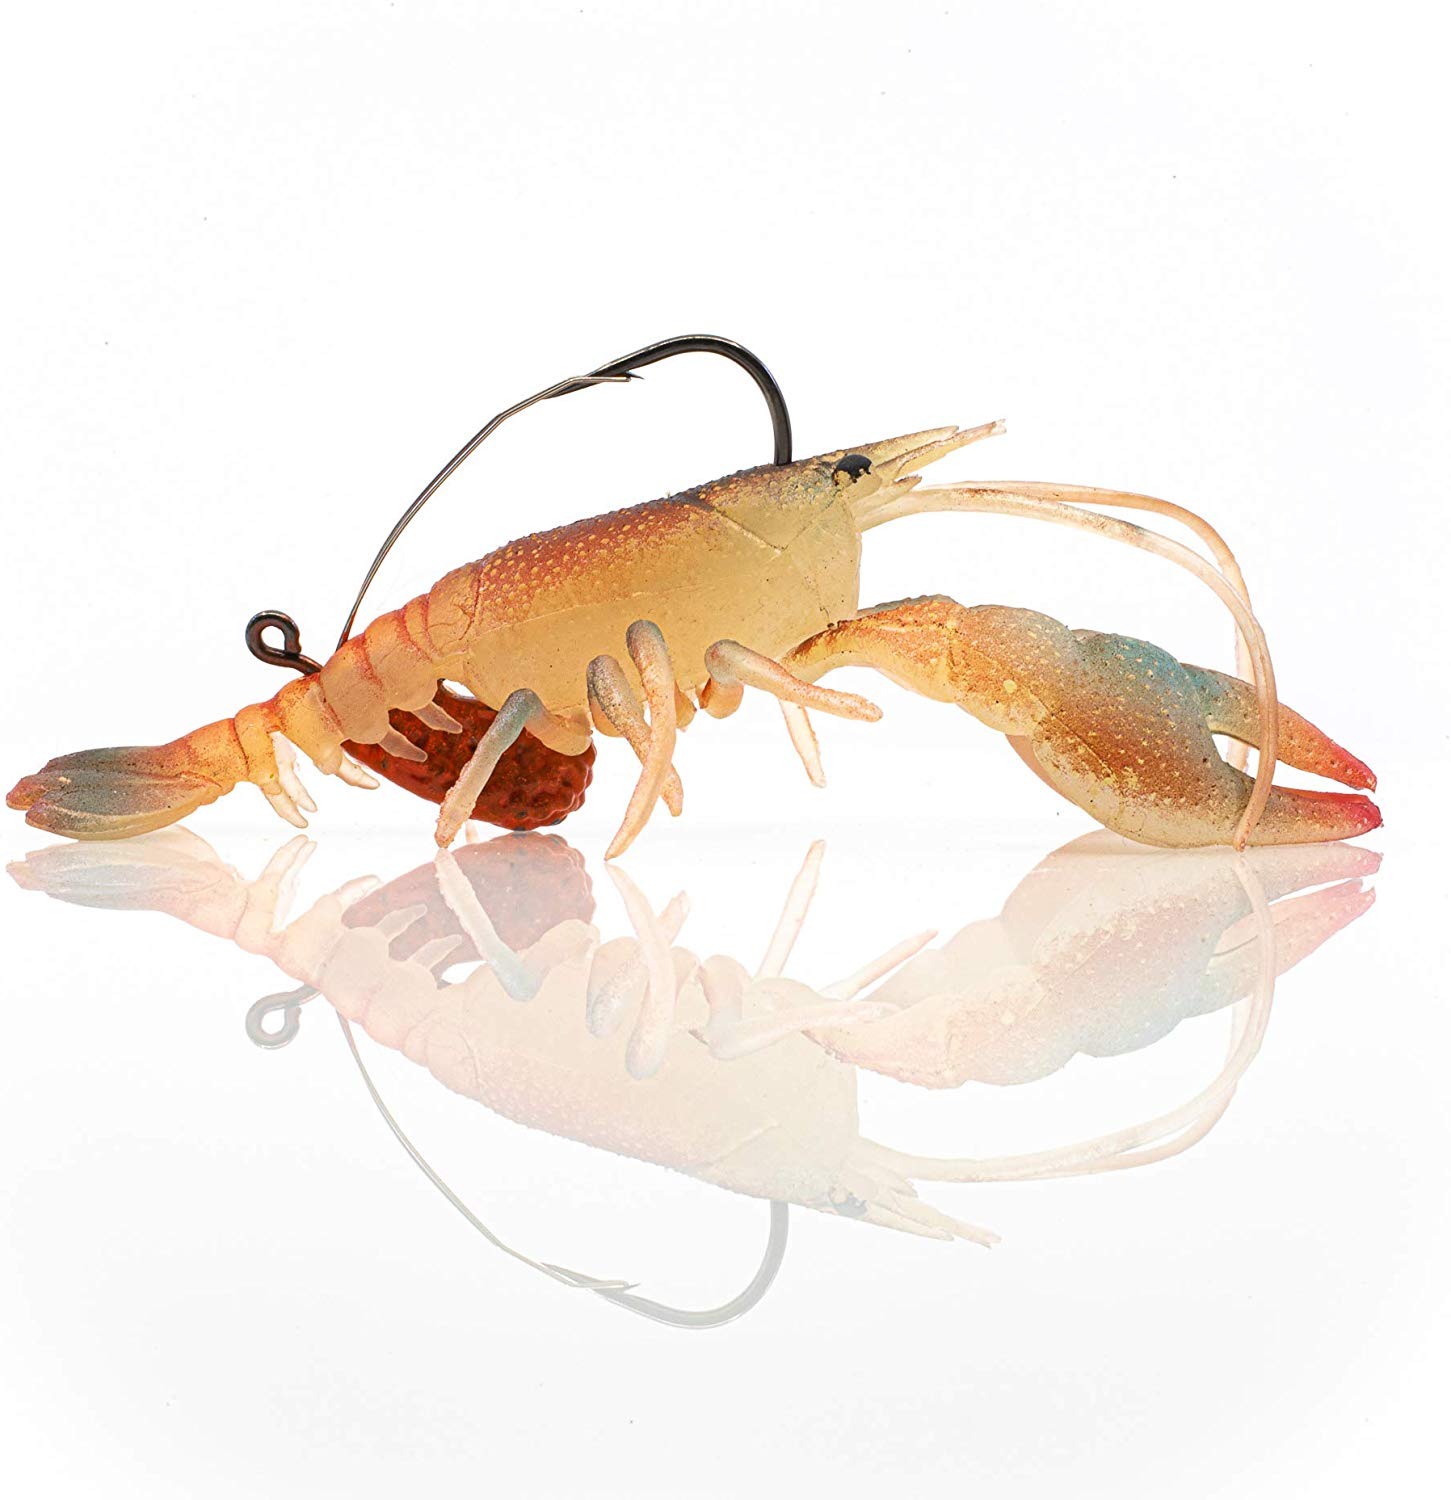 Chasebaits USA - The all new Root Beer color is a great natural option in  the #MudBug line up! The attention to detail is what really sets these Craw  Baits apart from